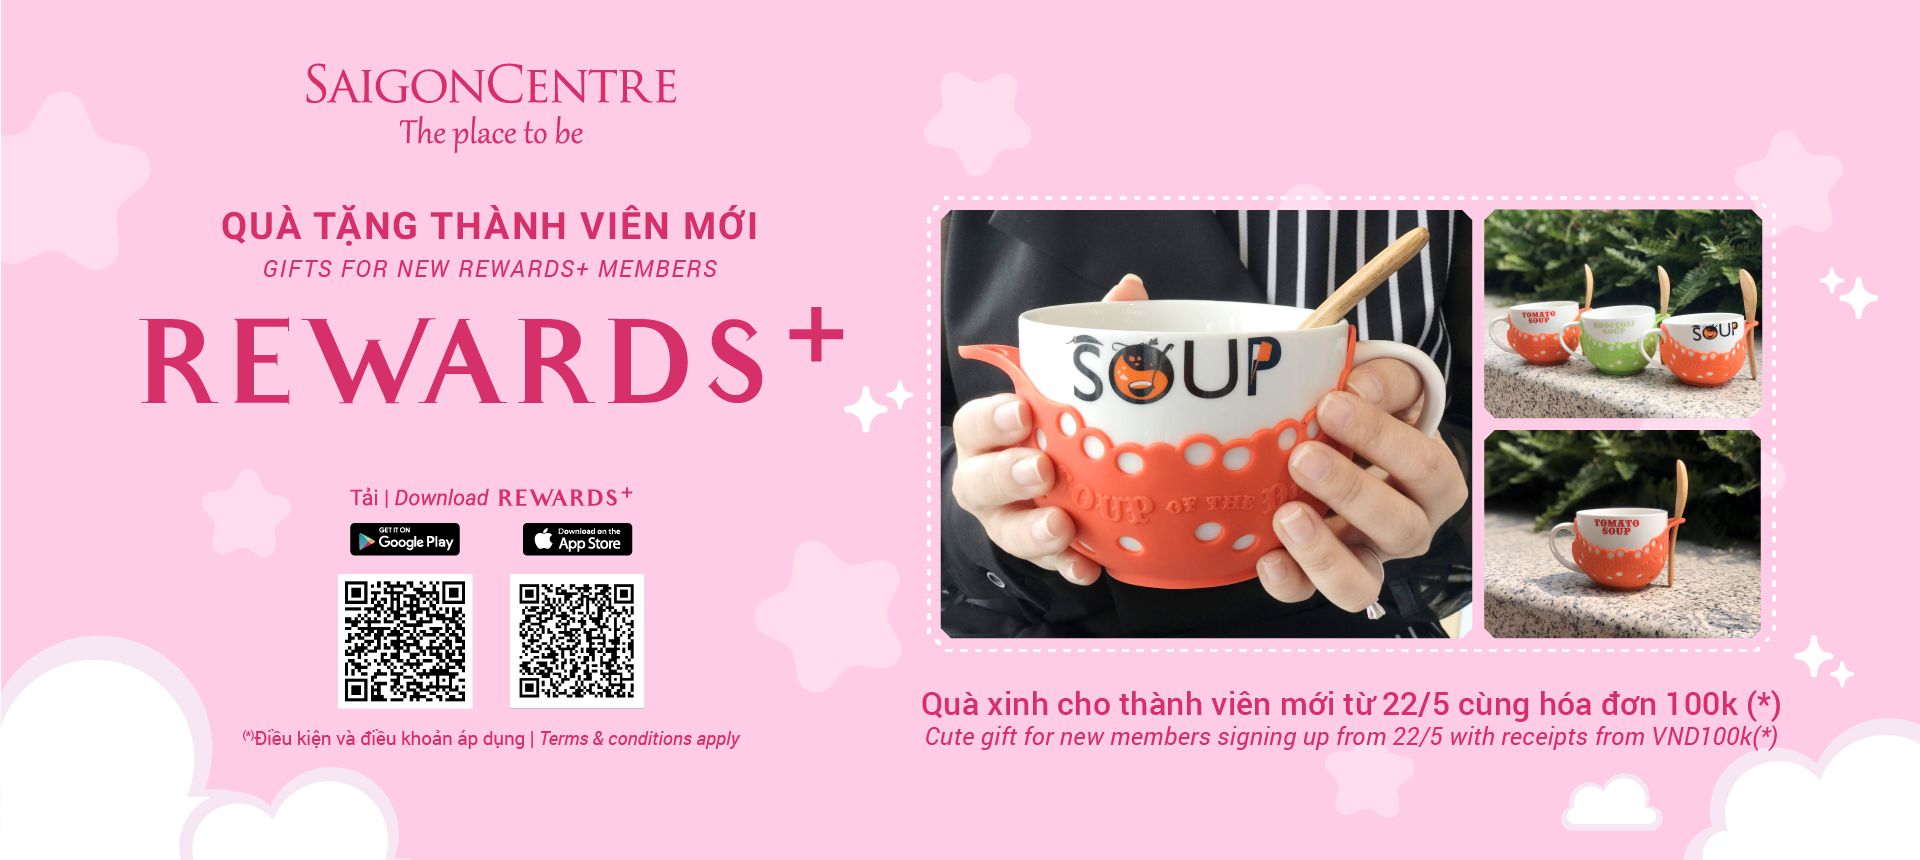 CUTE GIFT FOR NEW MEMBERS SIGNING UP FROM 22/05 WITH RECEIPTS FROM VND100K (*)